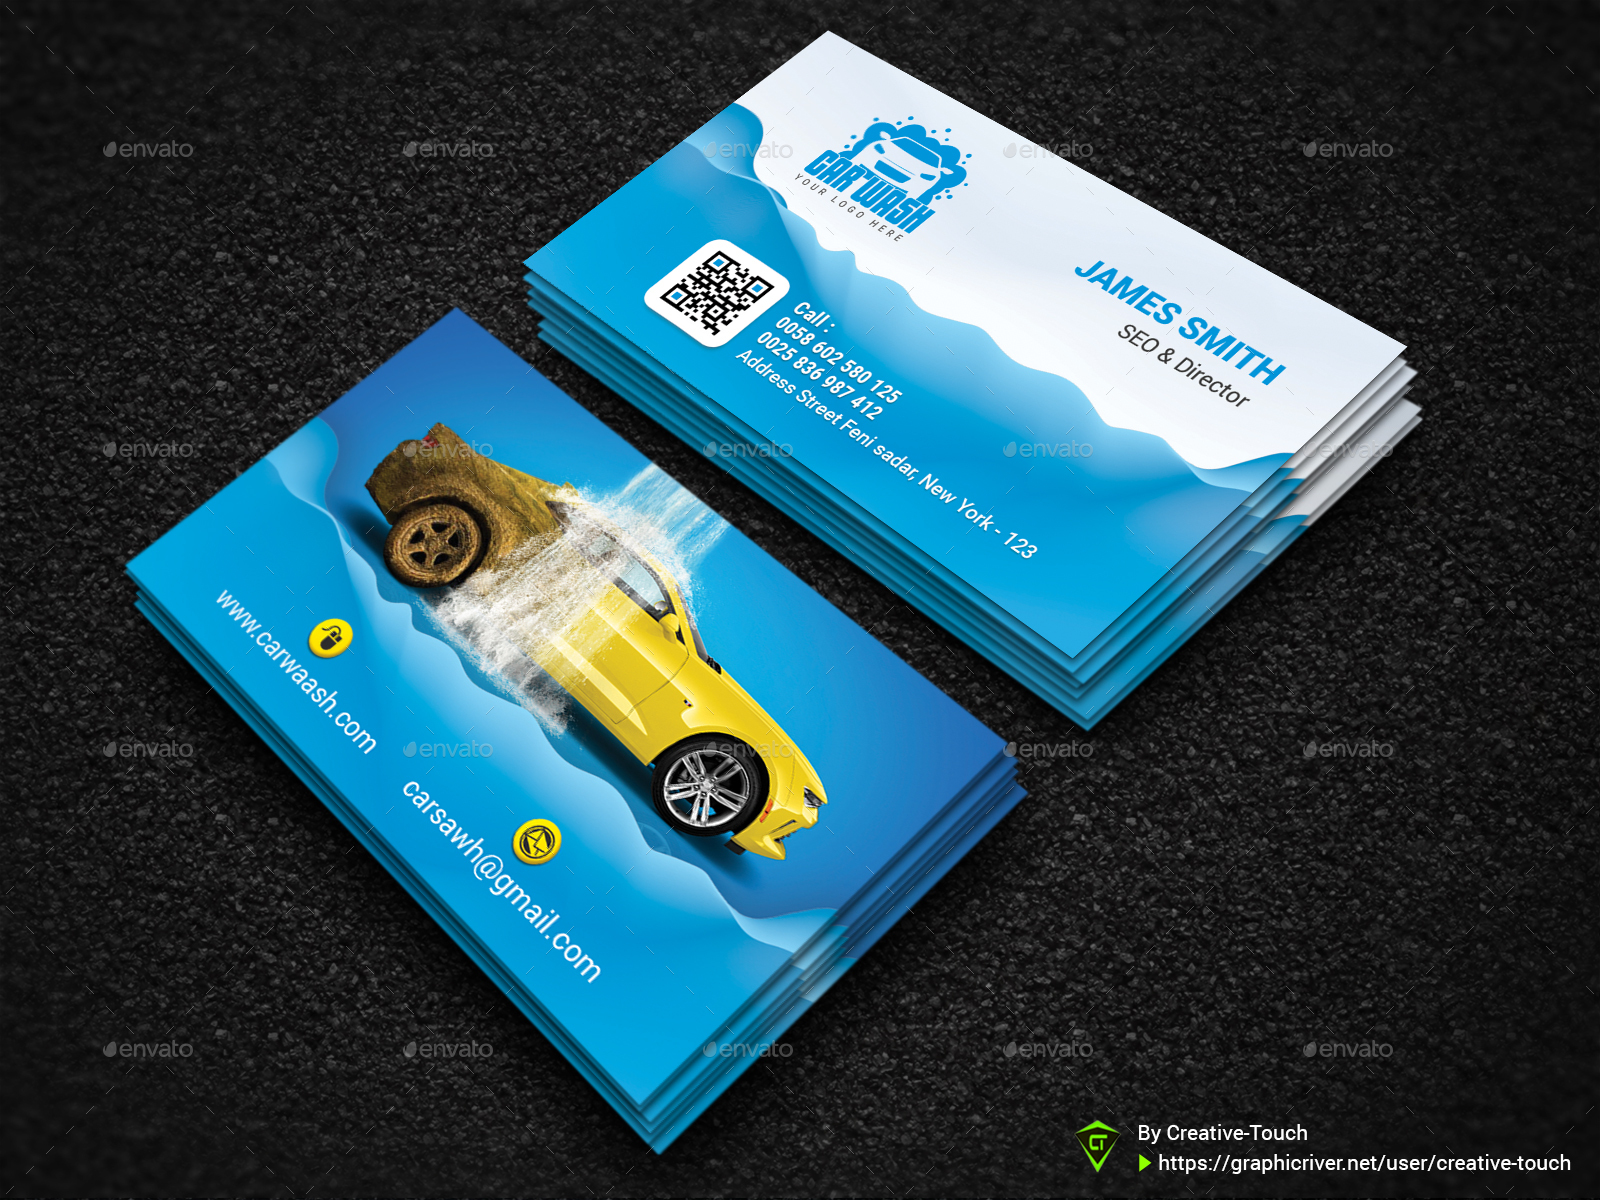 carwash business cards 2